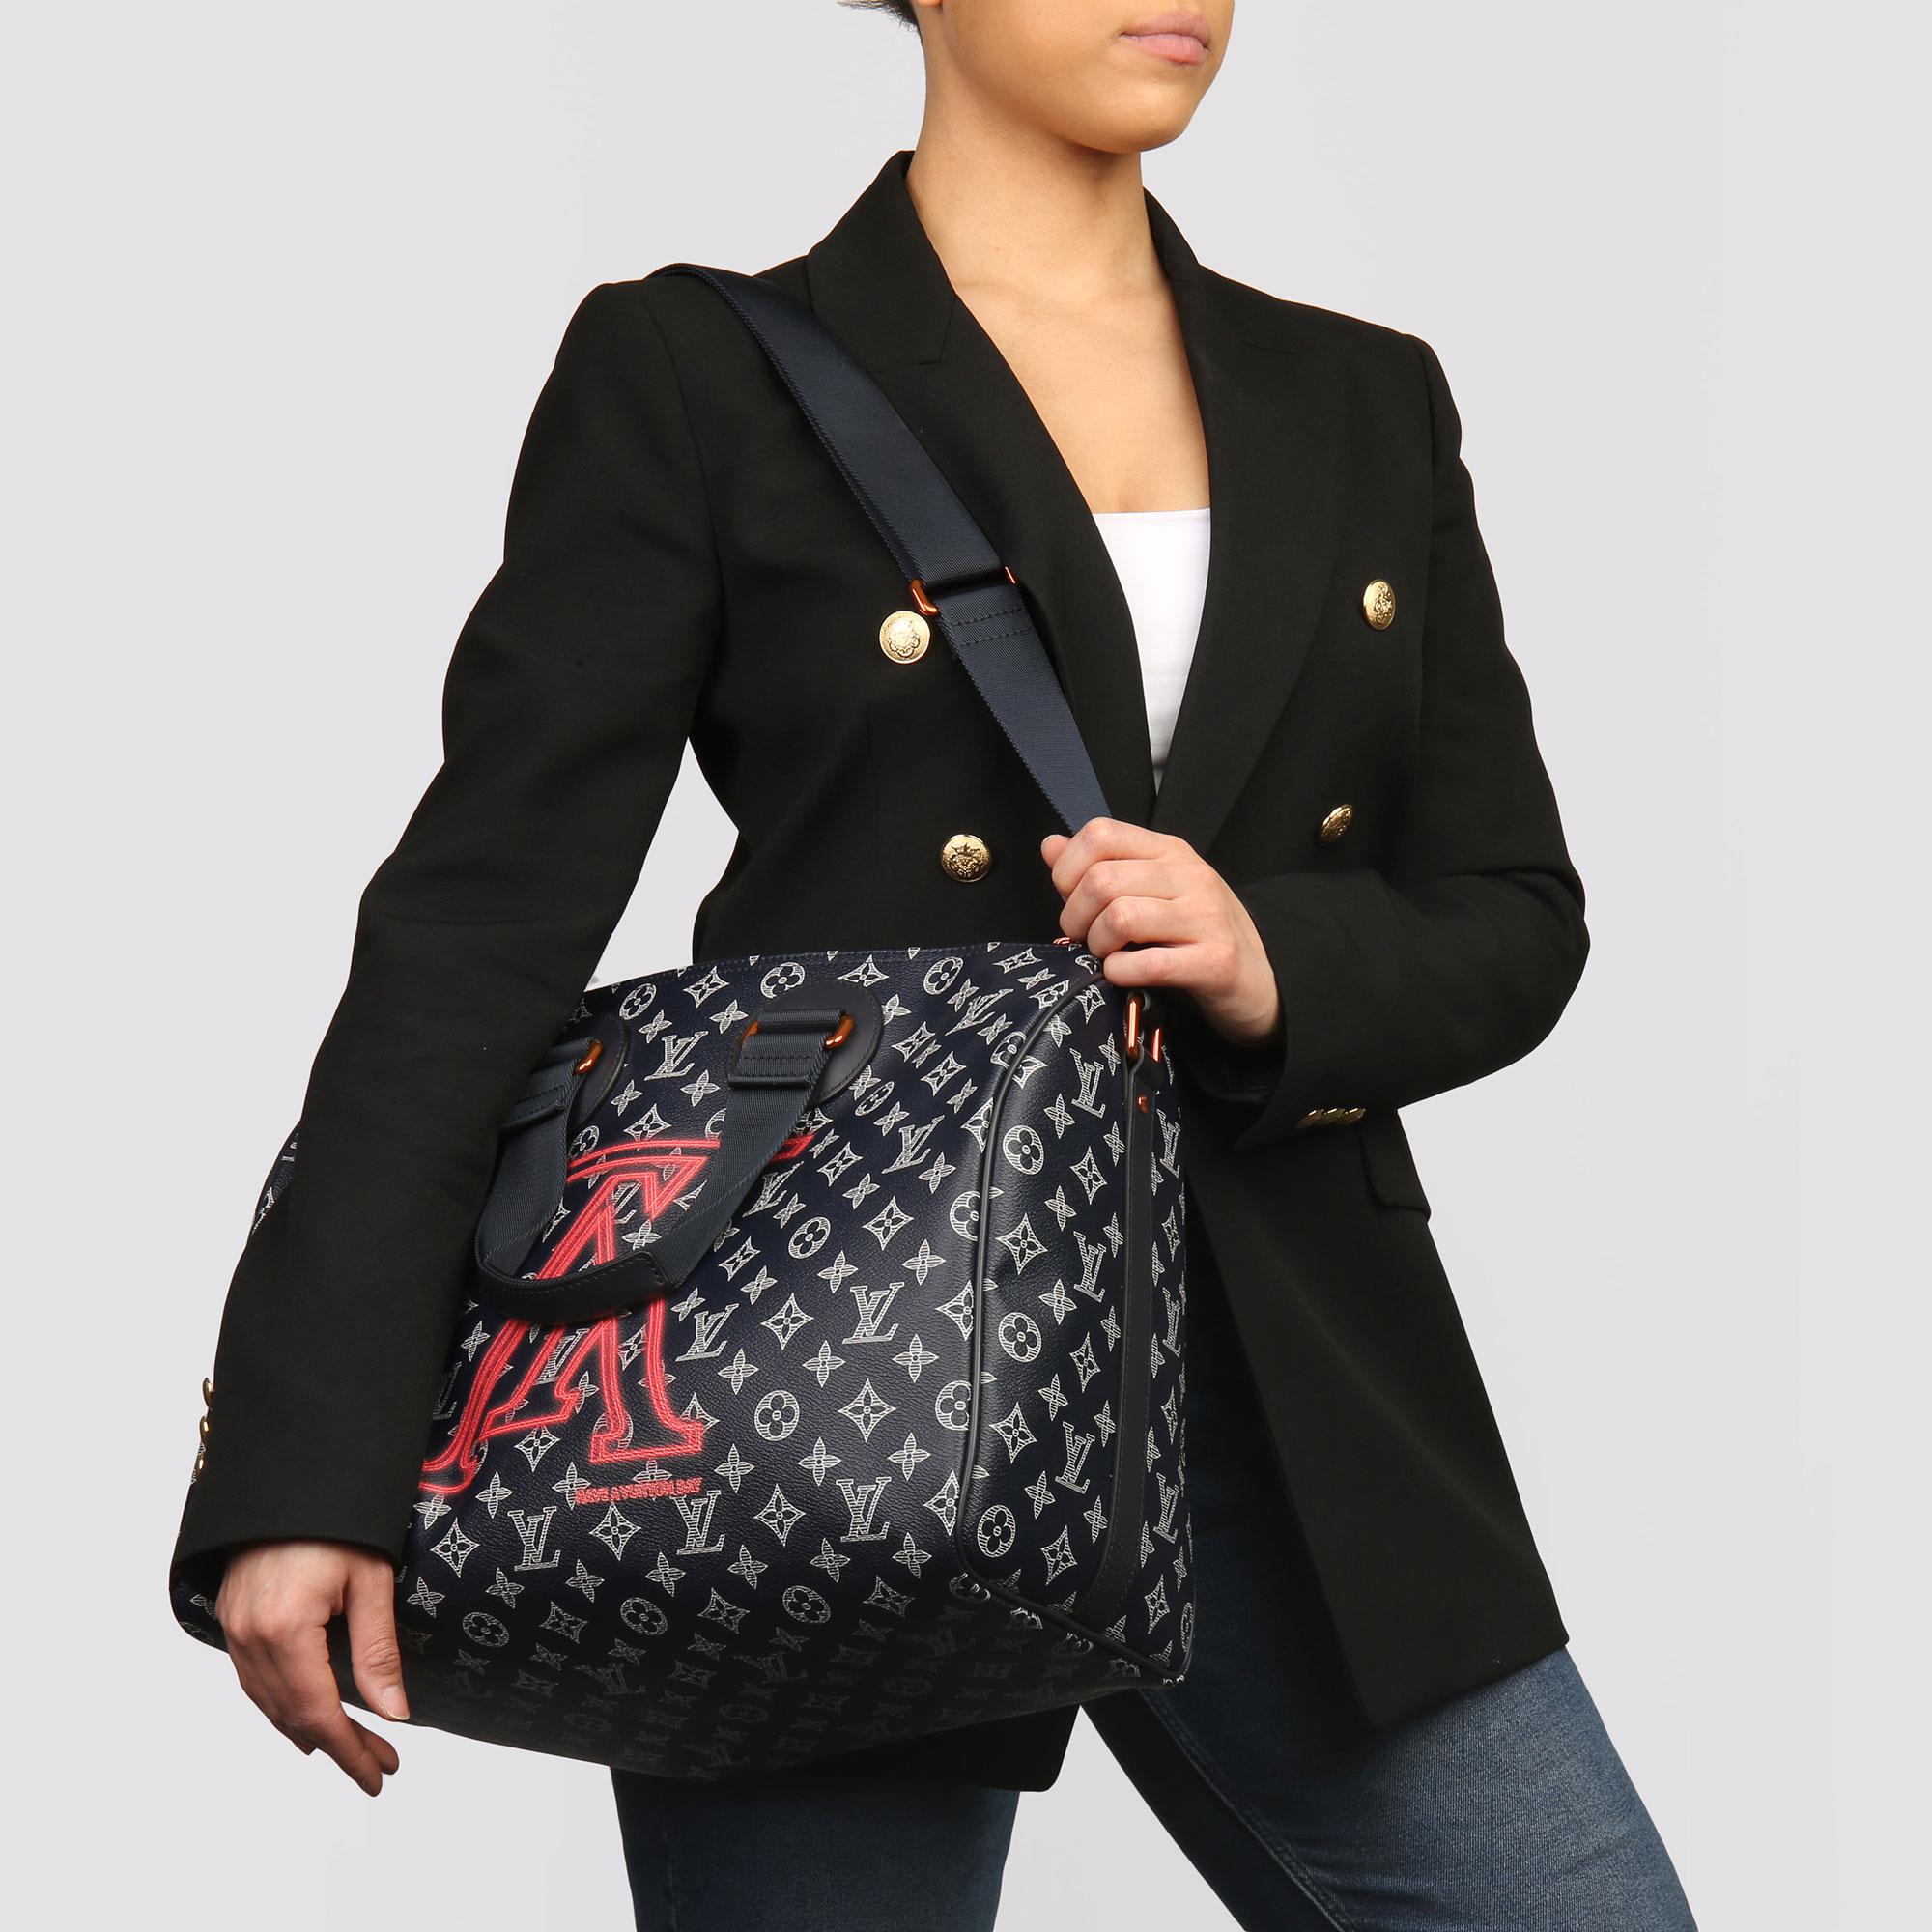 LOUIS VUITTON
Navy Pacific Eclipse Monogram Coated Canvas & Calfskin Leather Upside Down Speedy 40 Bandoulière

Xupes Reference: HB3859
Serial Number: AA1118
Age (Circa): 2018
Authenticity Details: Date Stamp (Made in France)
Gender: Unisex
Type: